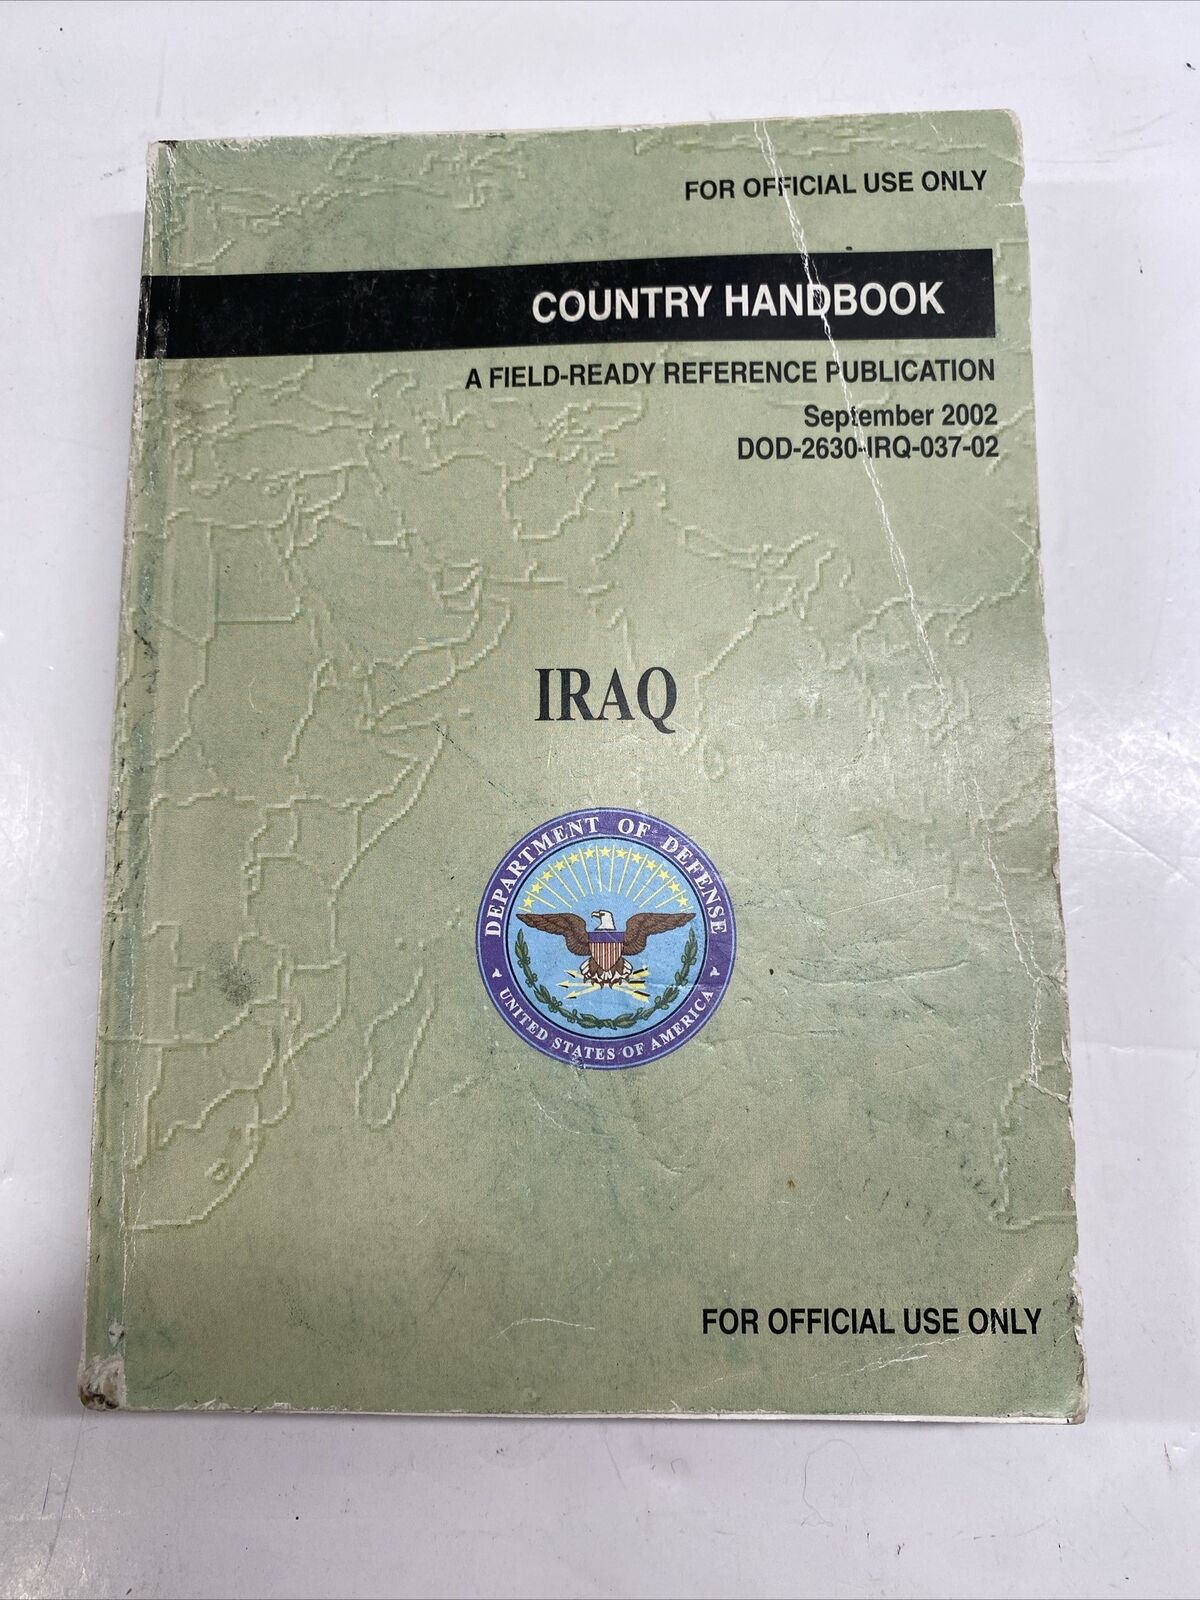 2002 Department Of Defense Iraq Country Handbook 7 Inches Long